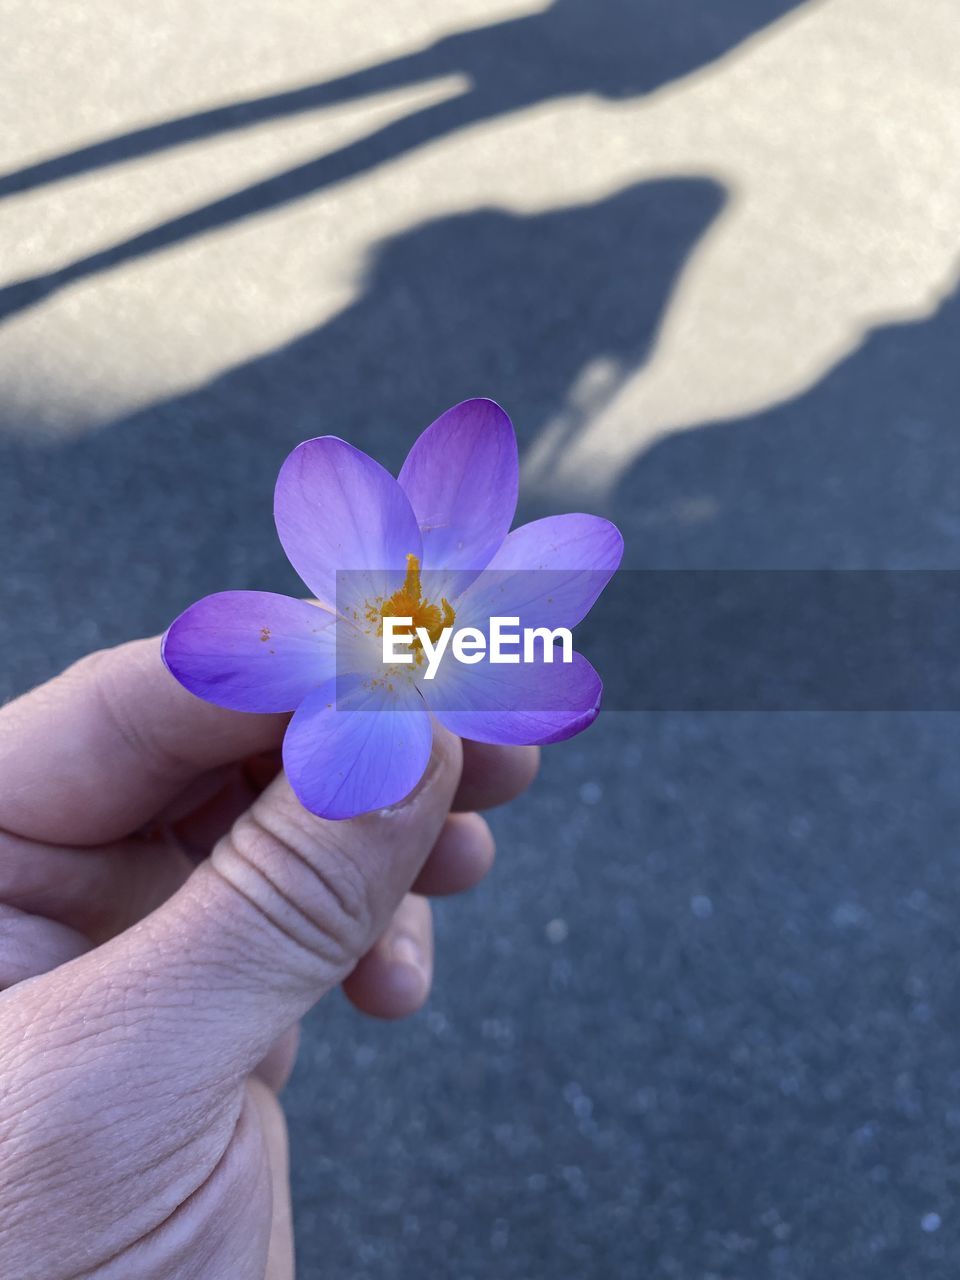 CLOSE-UP OF HAND HOLDING PURPLE FLOWER